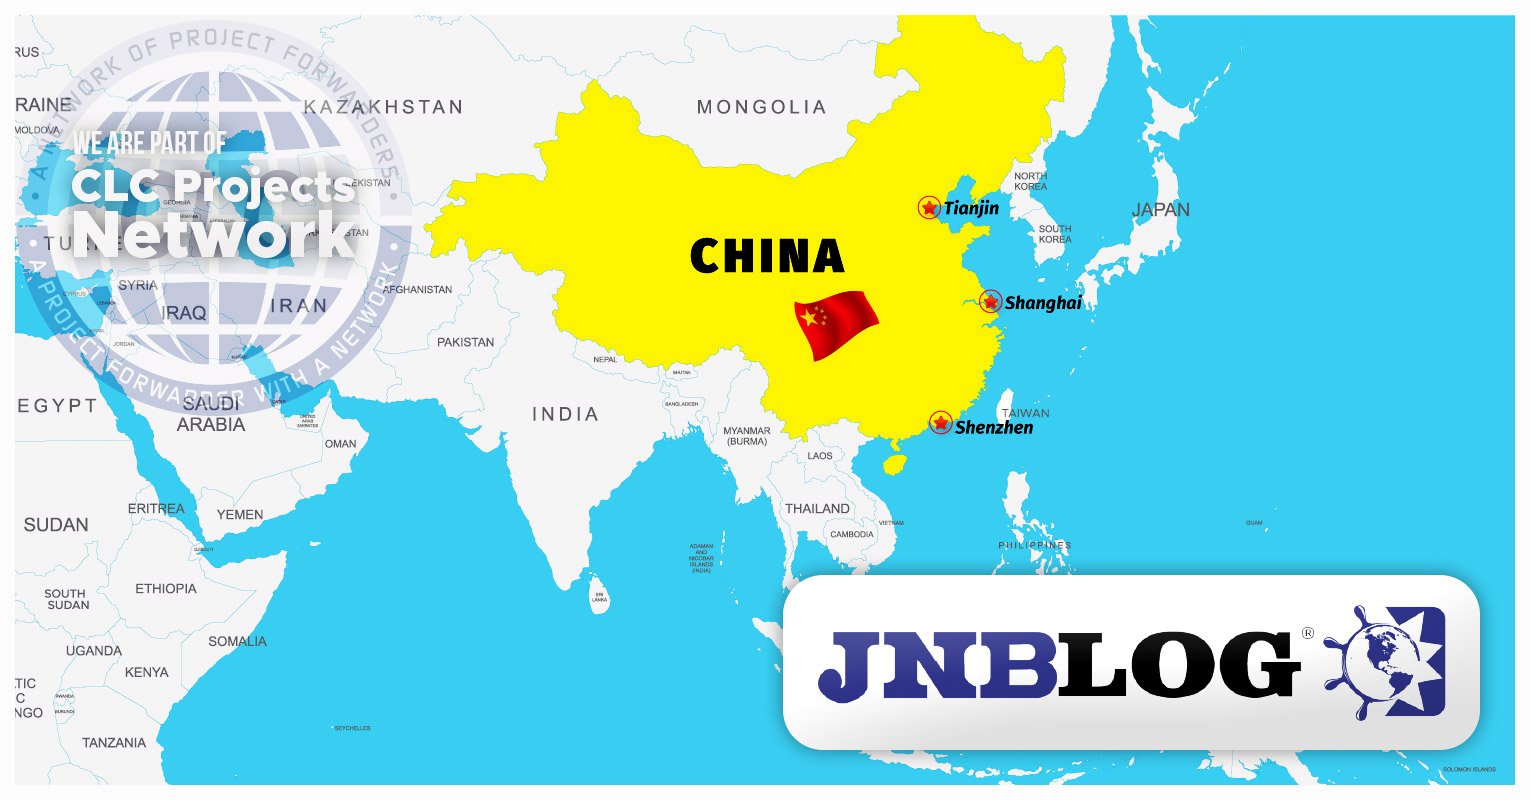 JNBLOG Announces a Change to their Company Name